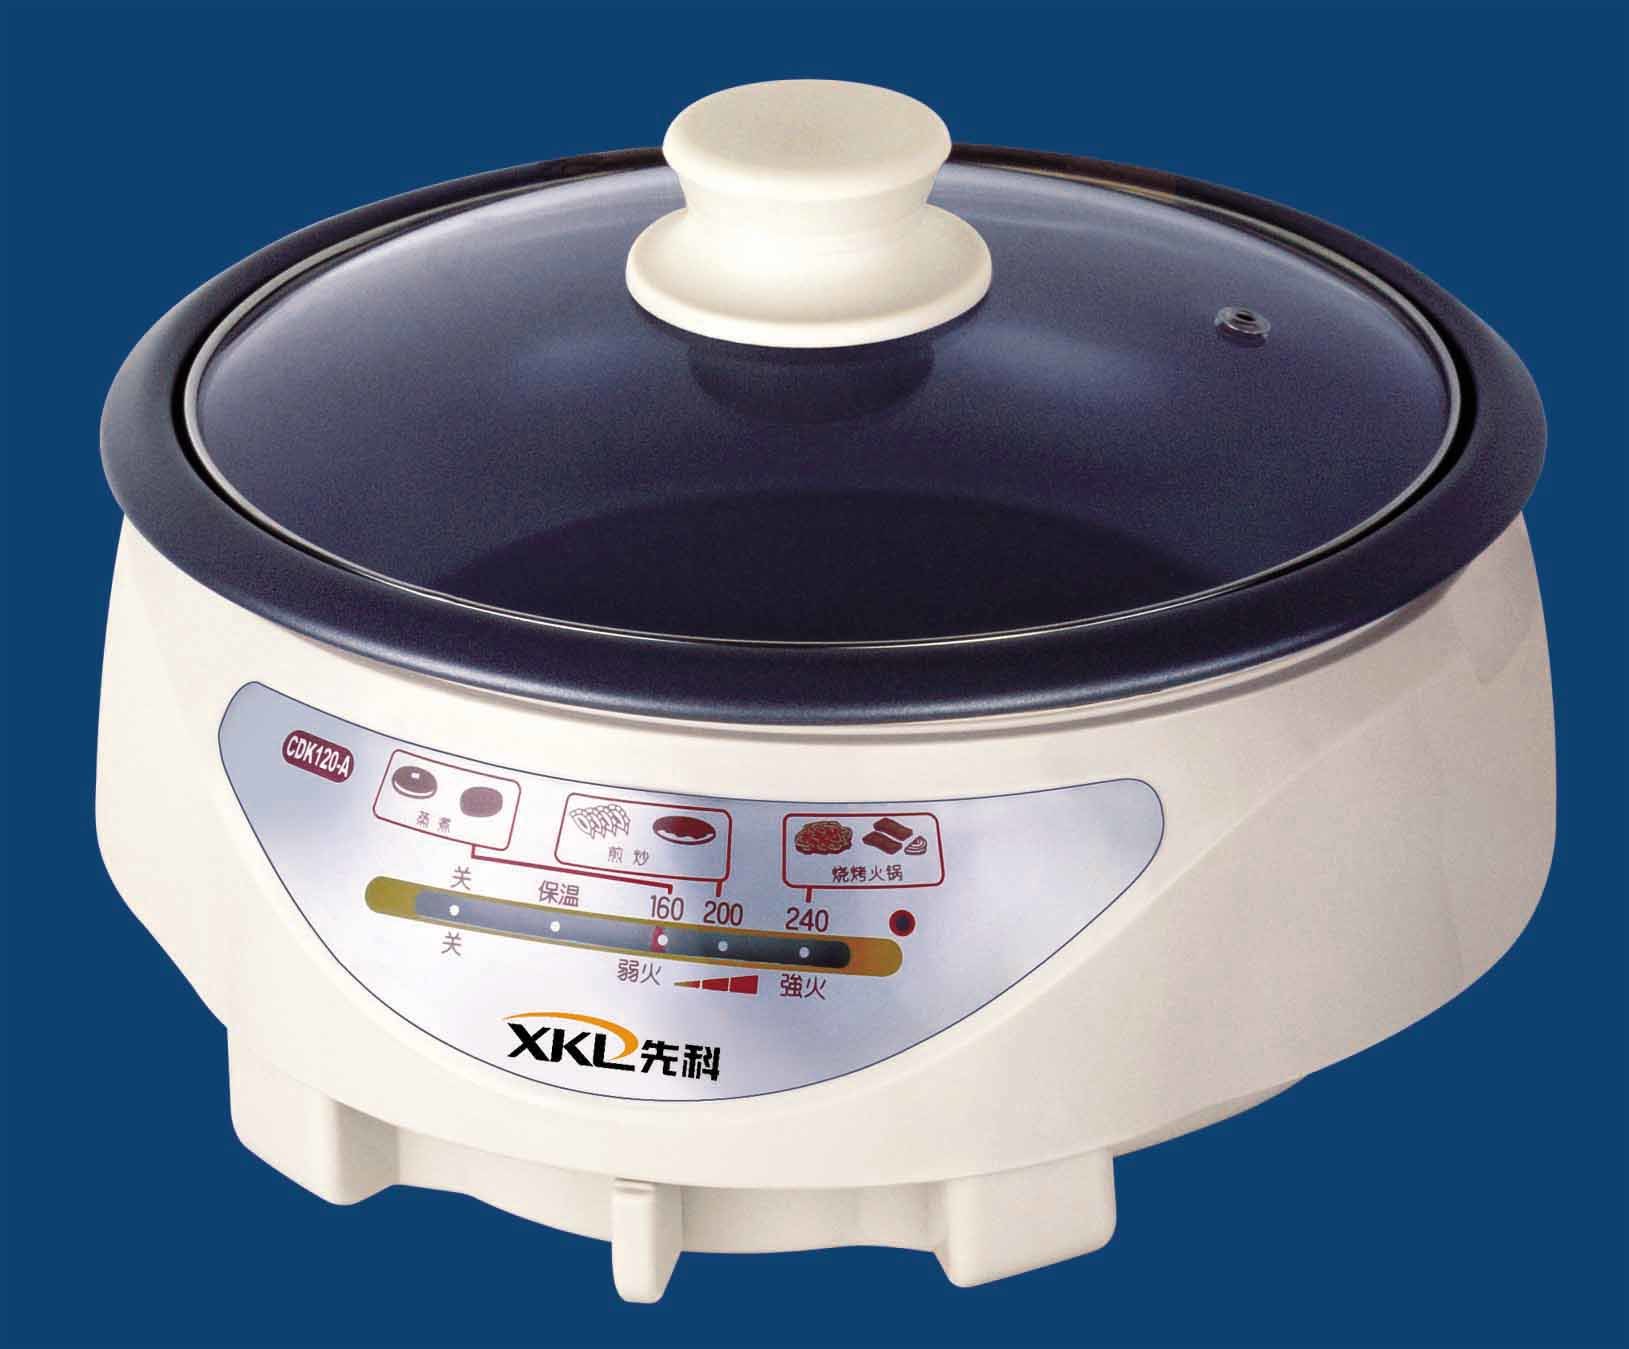 Modern Multi Cookers